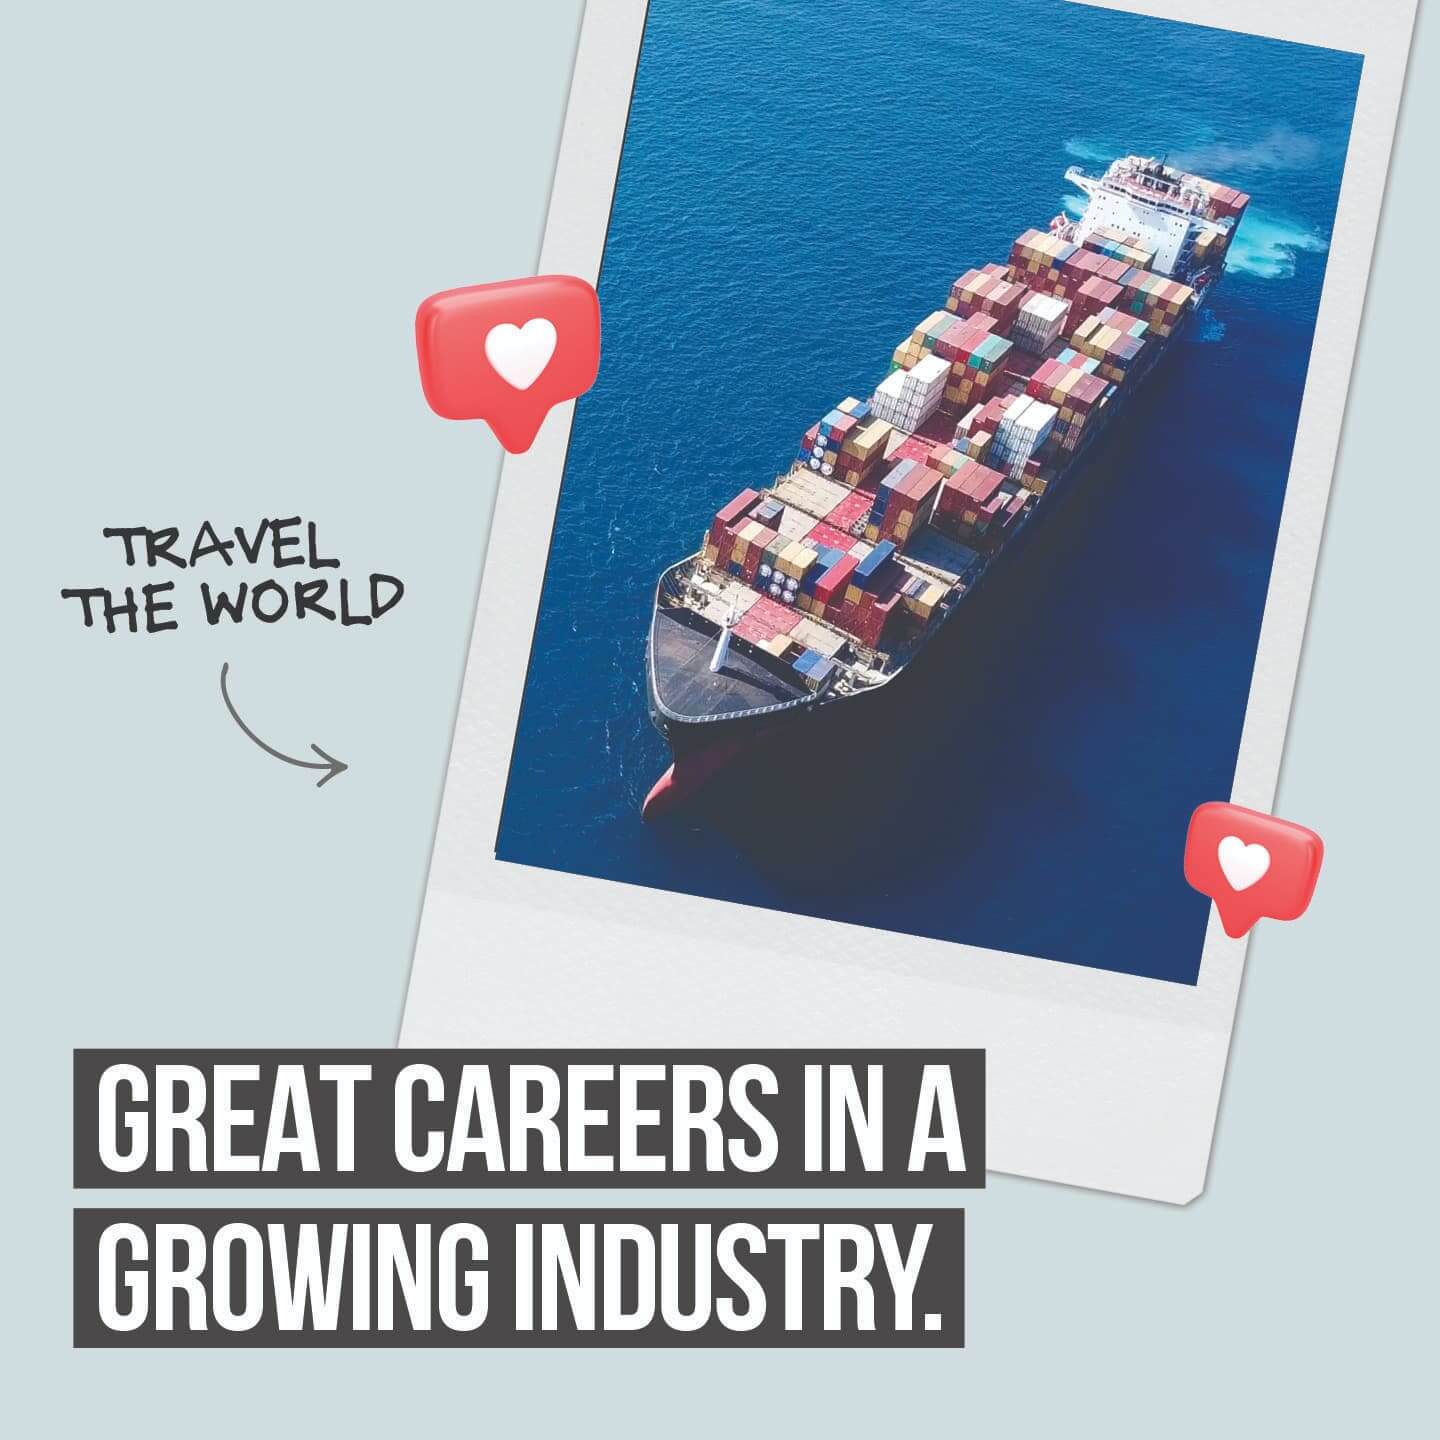 Maritime - Great careers in a growing industry